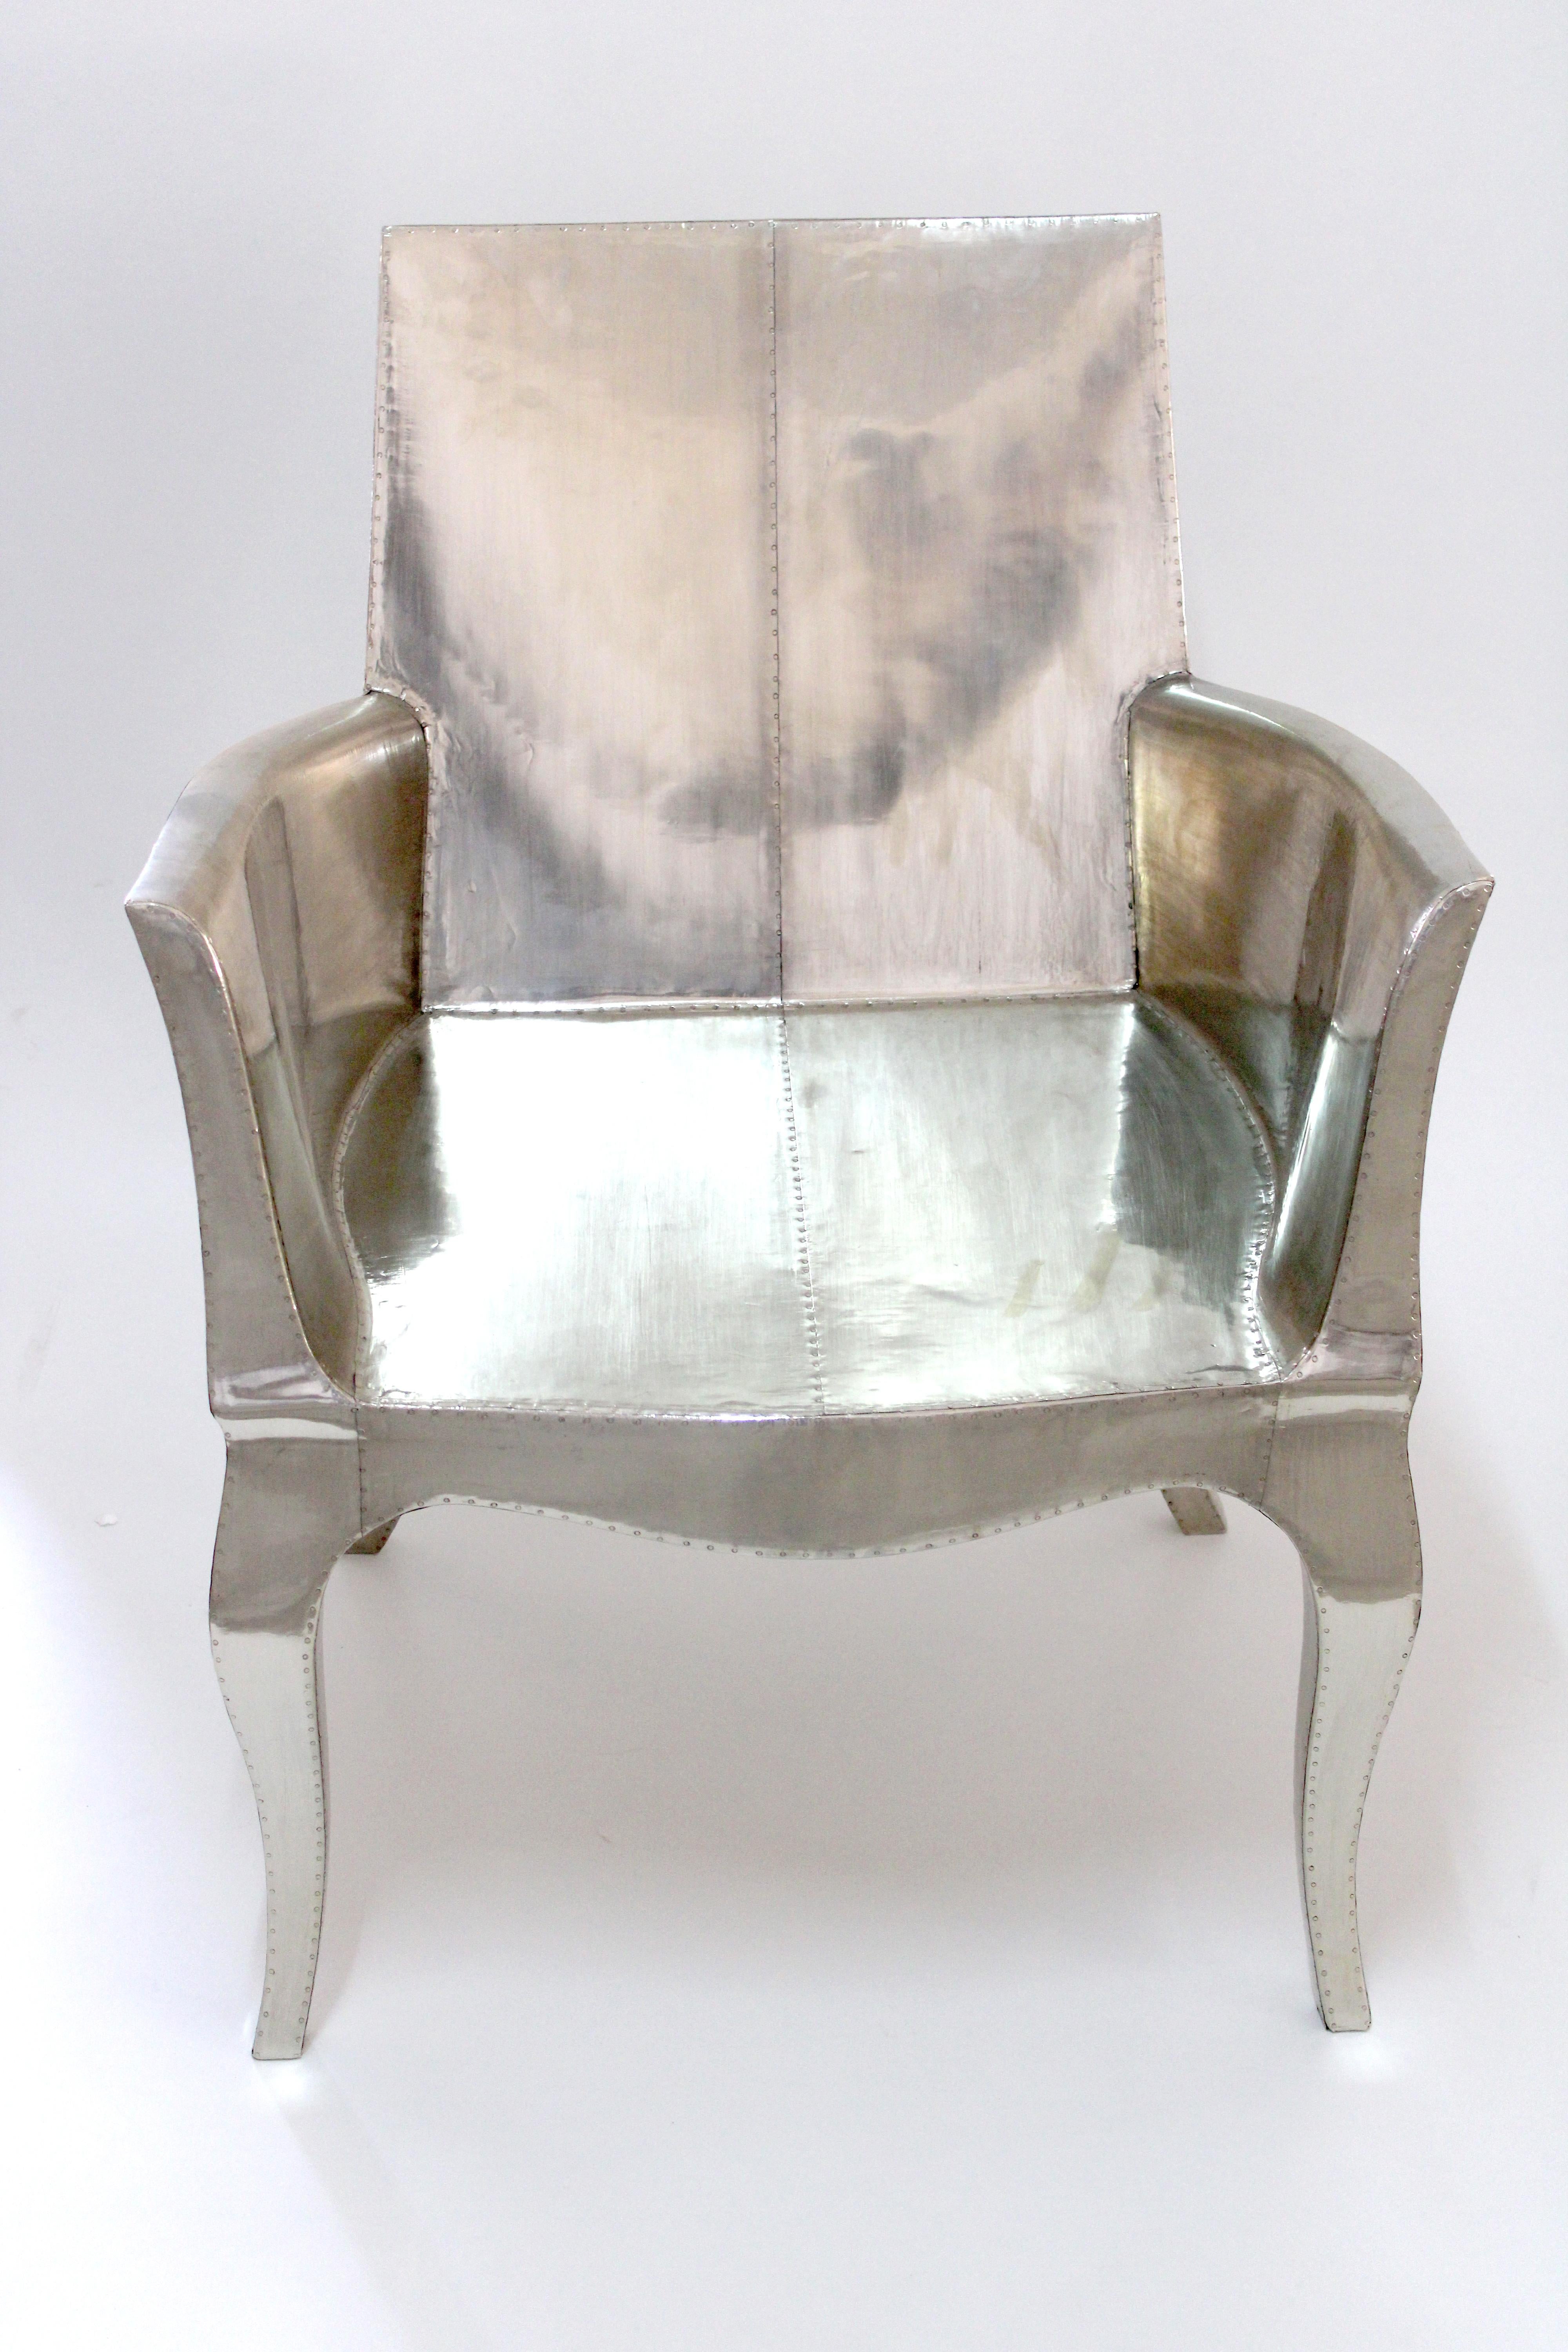 Sheet Metal Art Nouveau Chairs in Smooth White Bronze by Paul Mathieu for S. Odegard For Sale